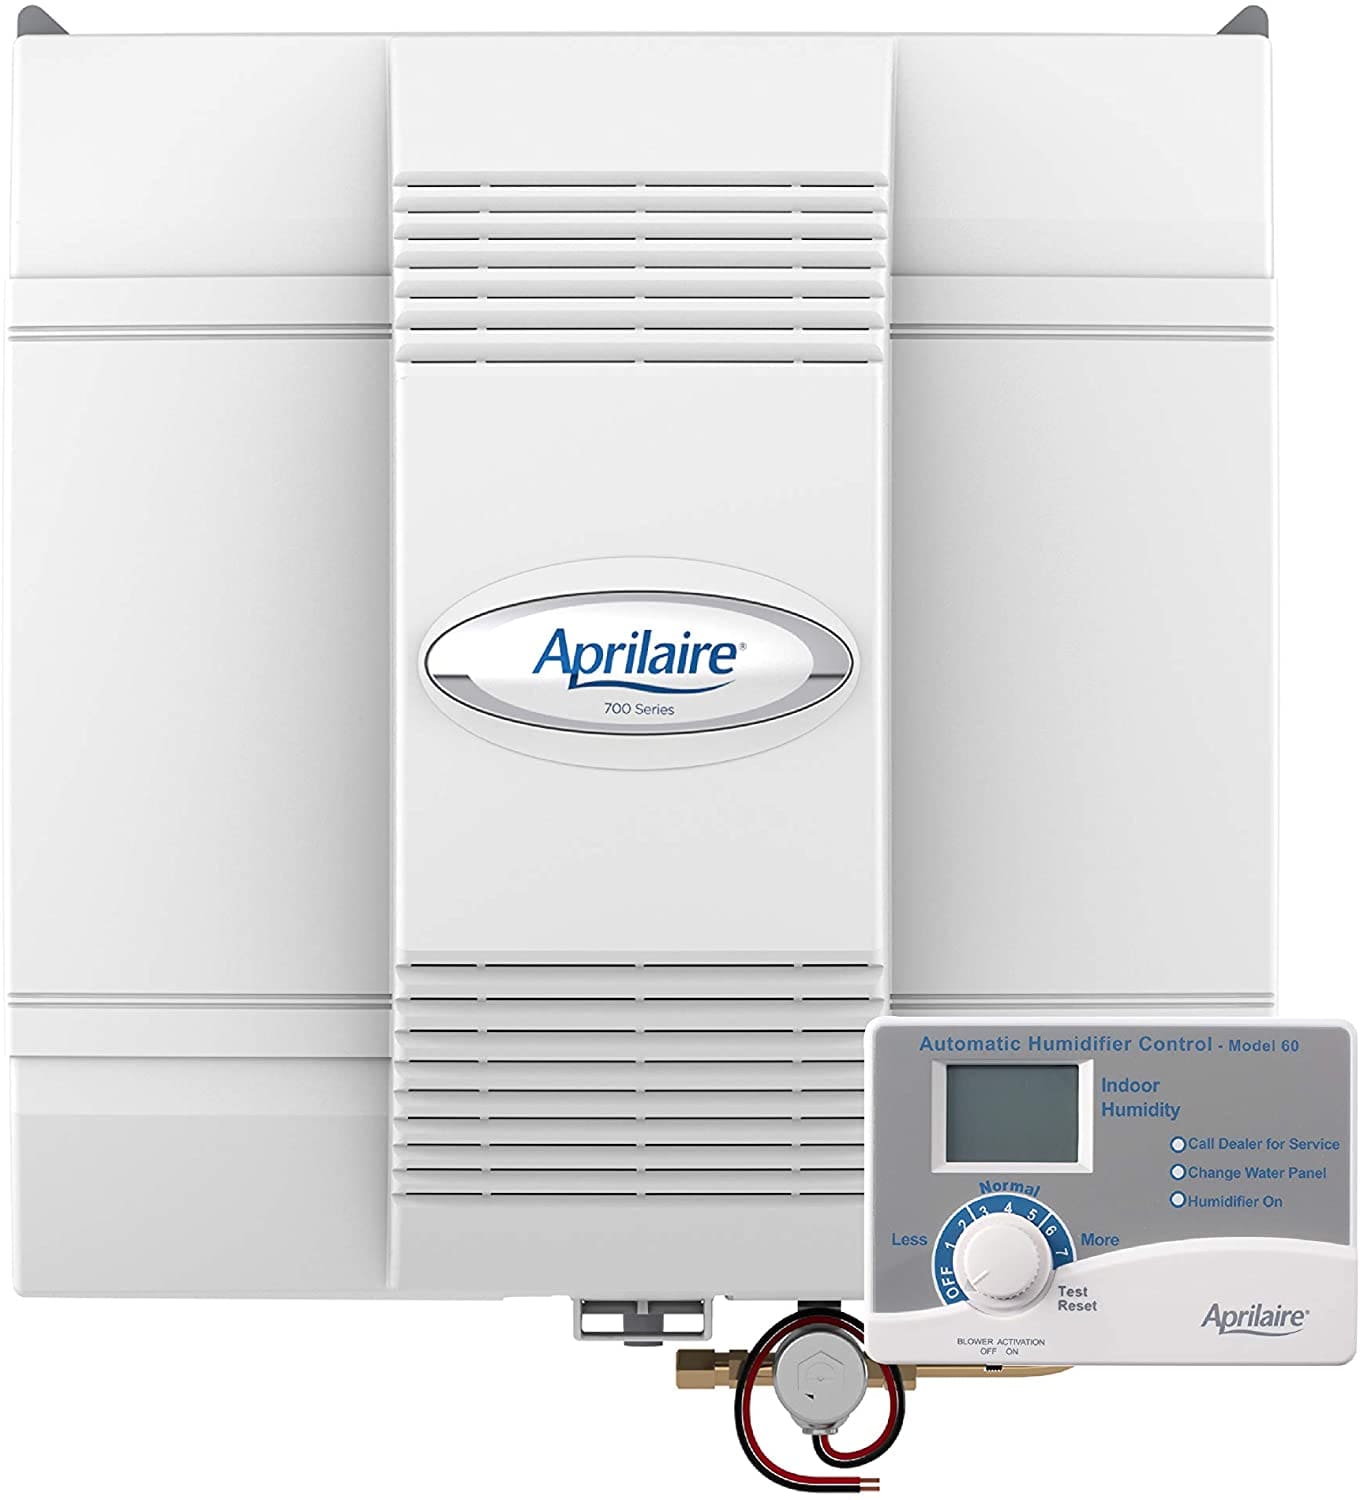 Aprilaire 700 automatic whole-house humidifier